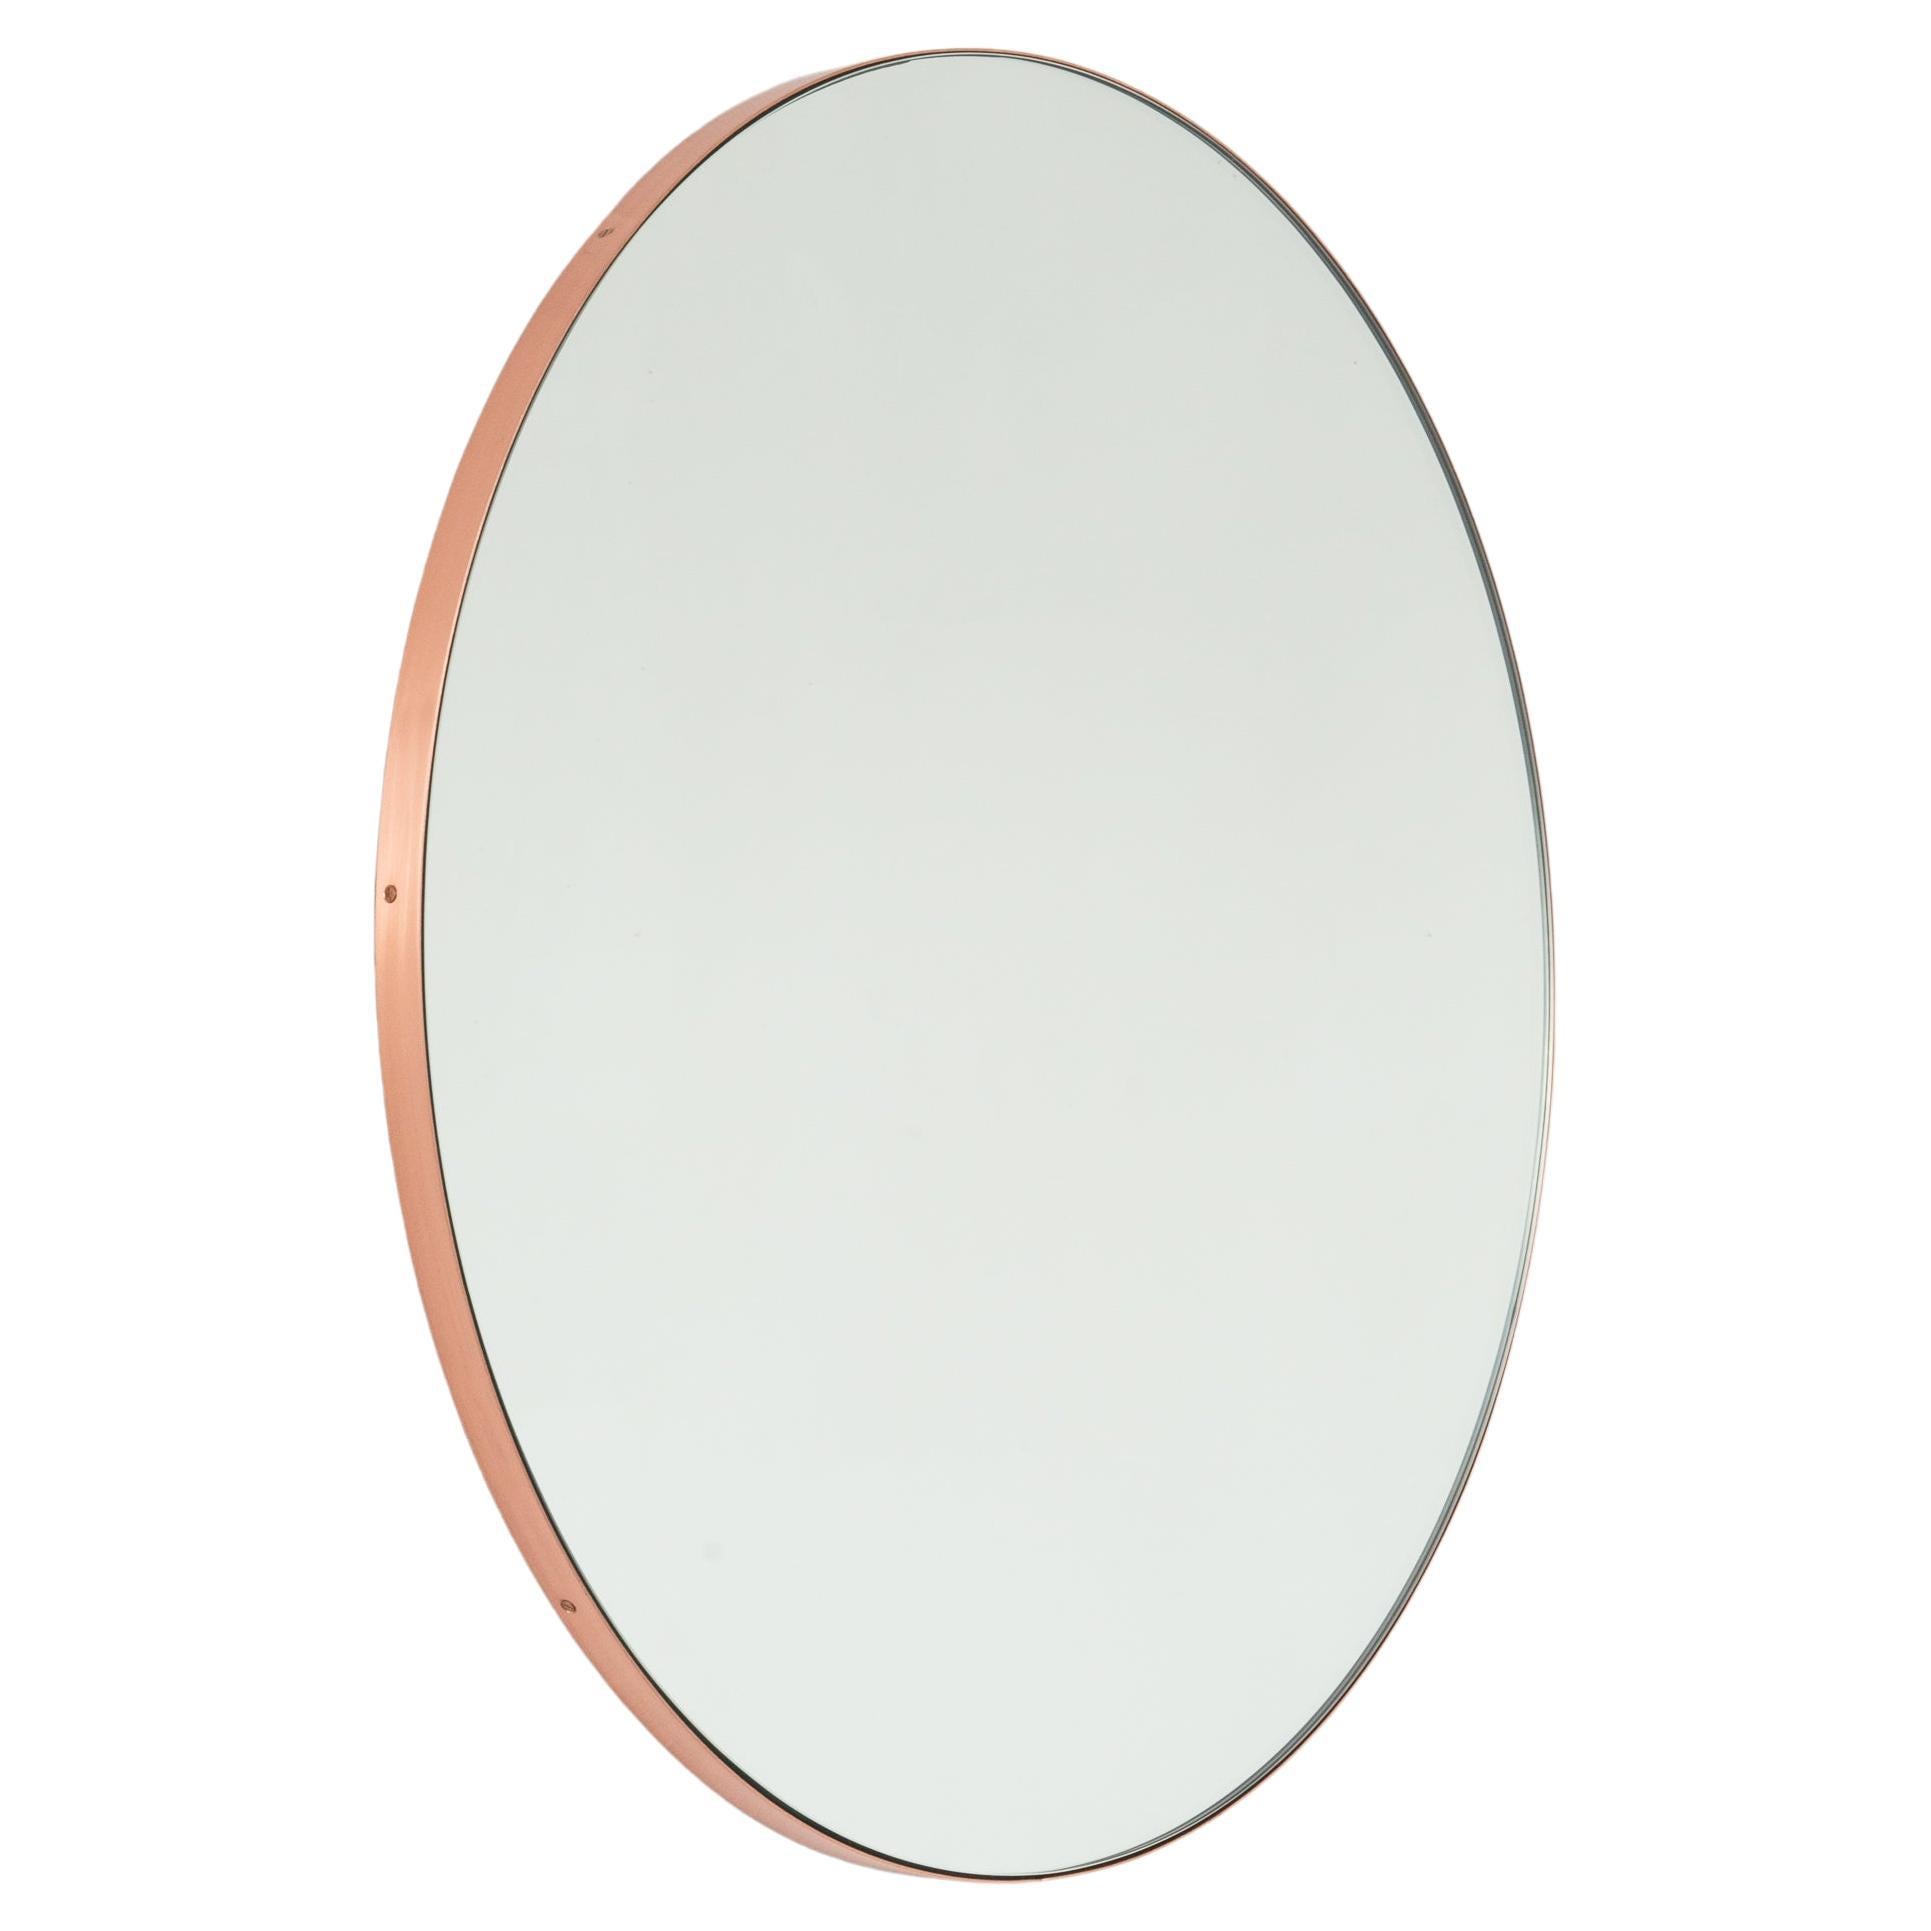 Orbis Round Modern Minimalist Handcrafted Mirror with Copper Frame, Large For Sale